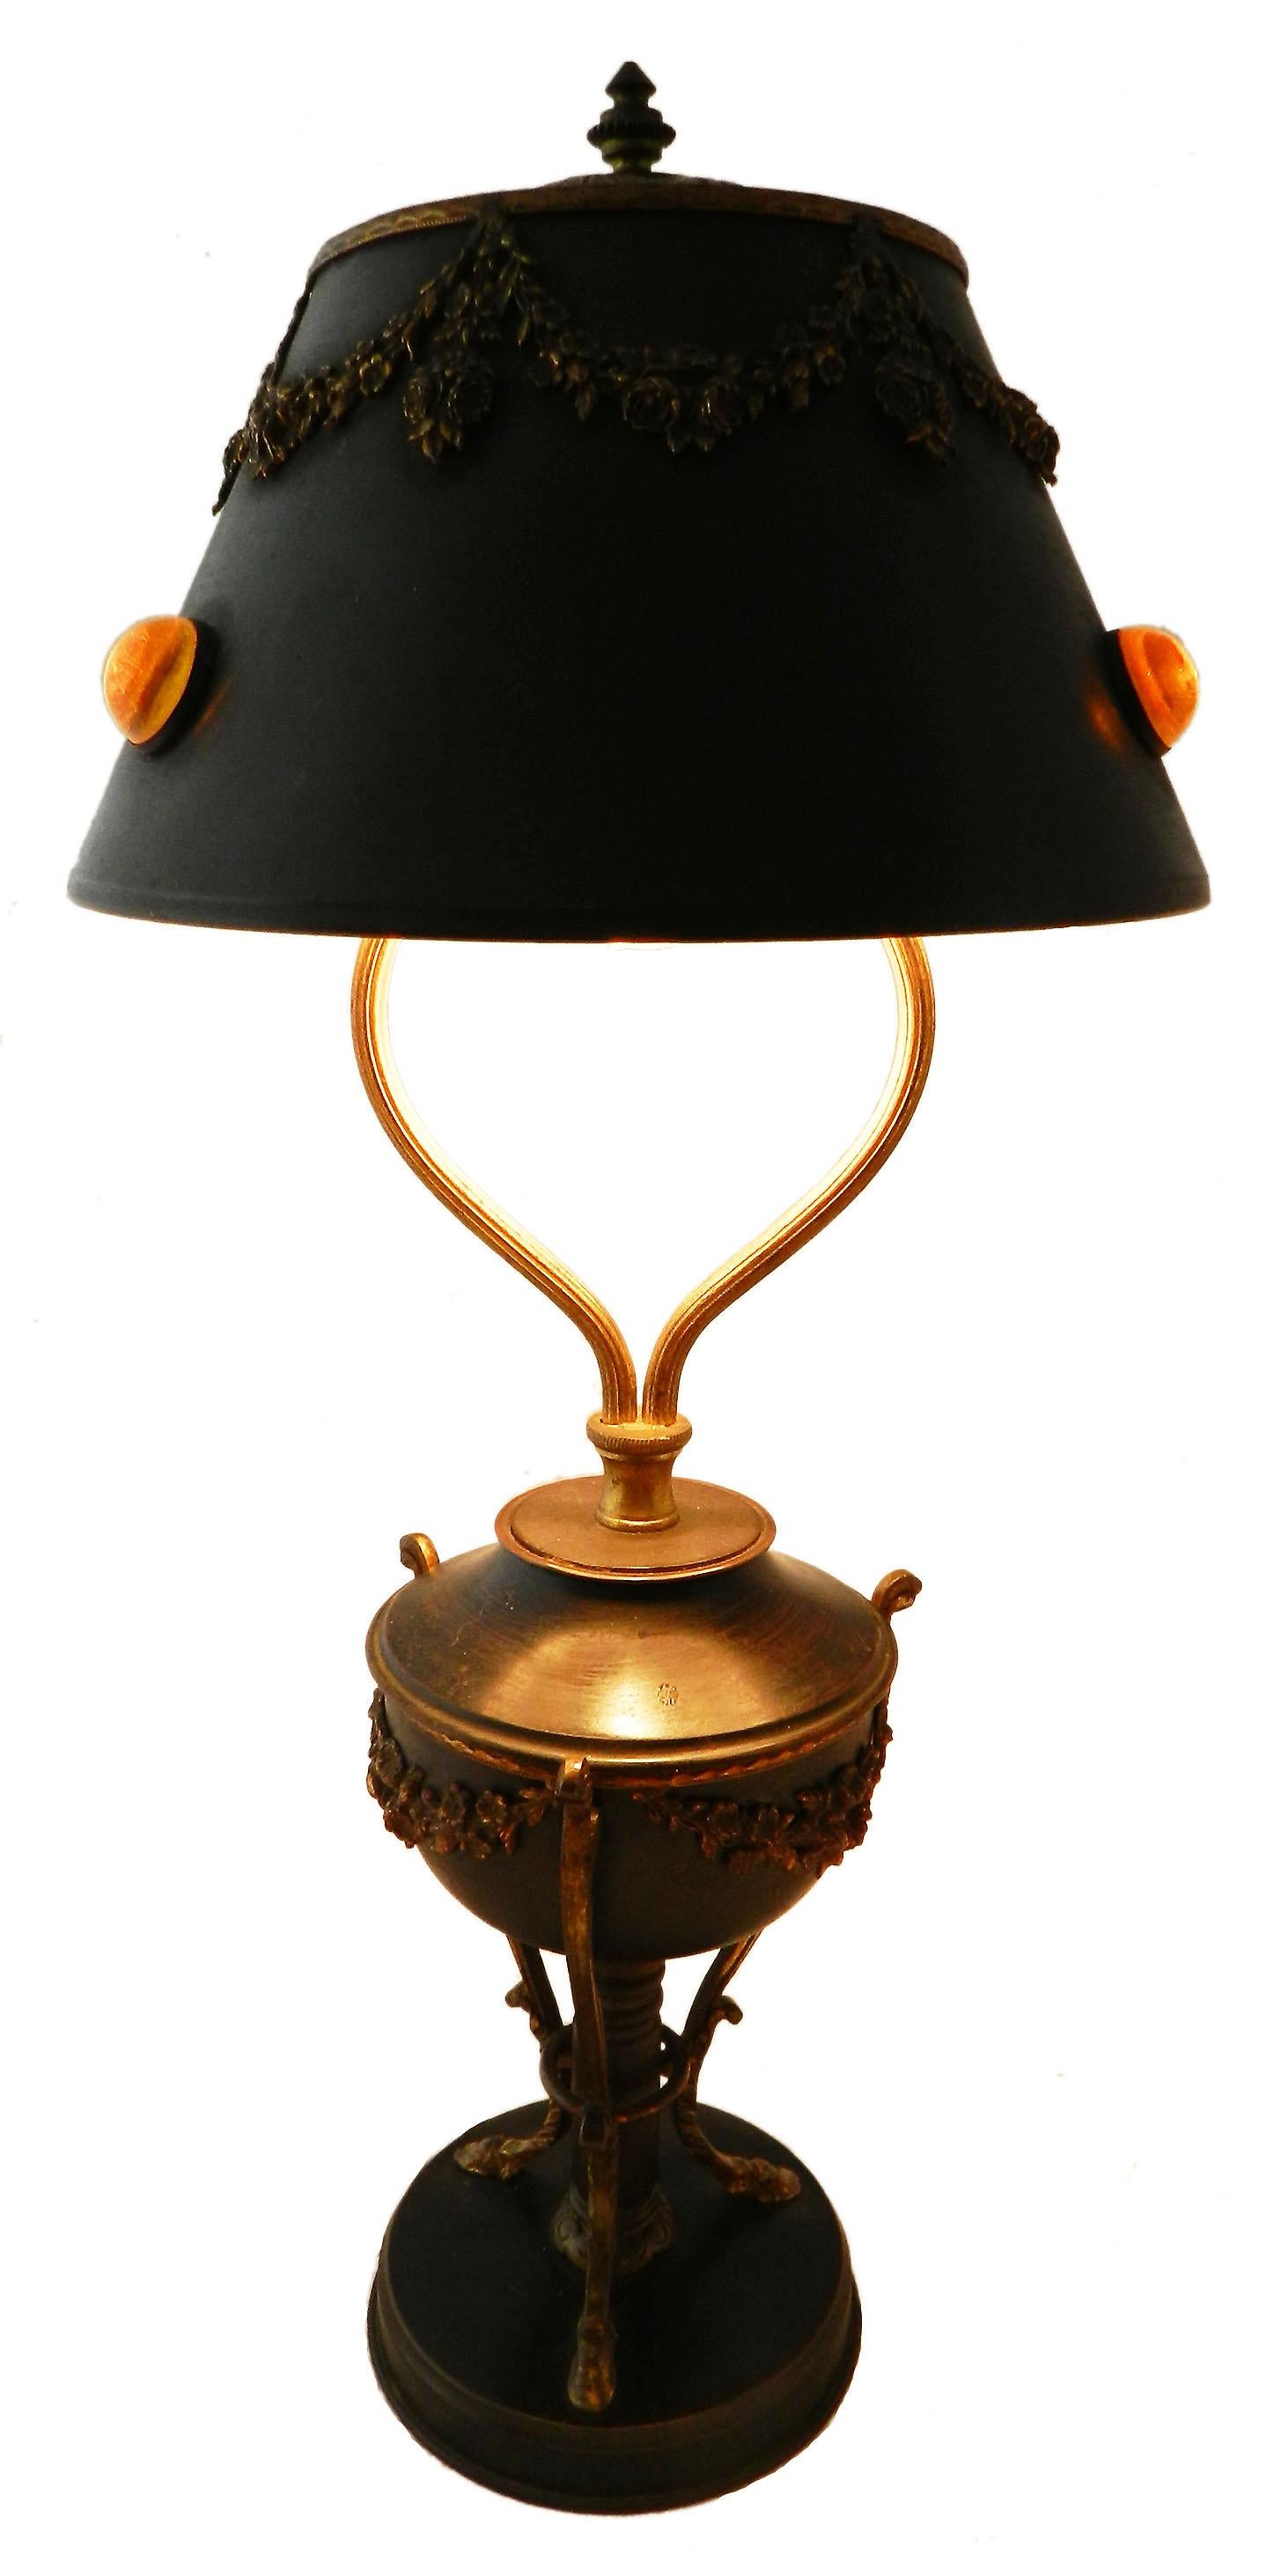 Belle époque table lamp French Cabuchons Bohemian, circa 1890
Unusual lamp with great distressed patina
Good antique condition with minor signs of age
This will be rewired to work for either US standards or else UK and EU standards. 






   